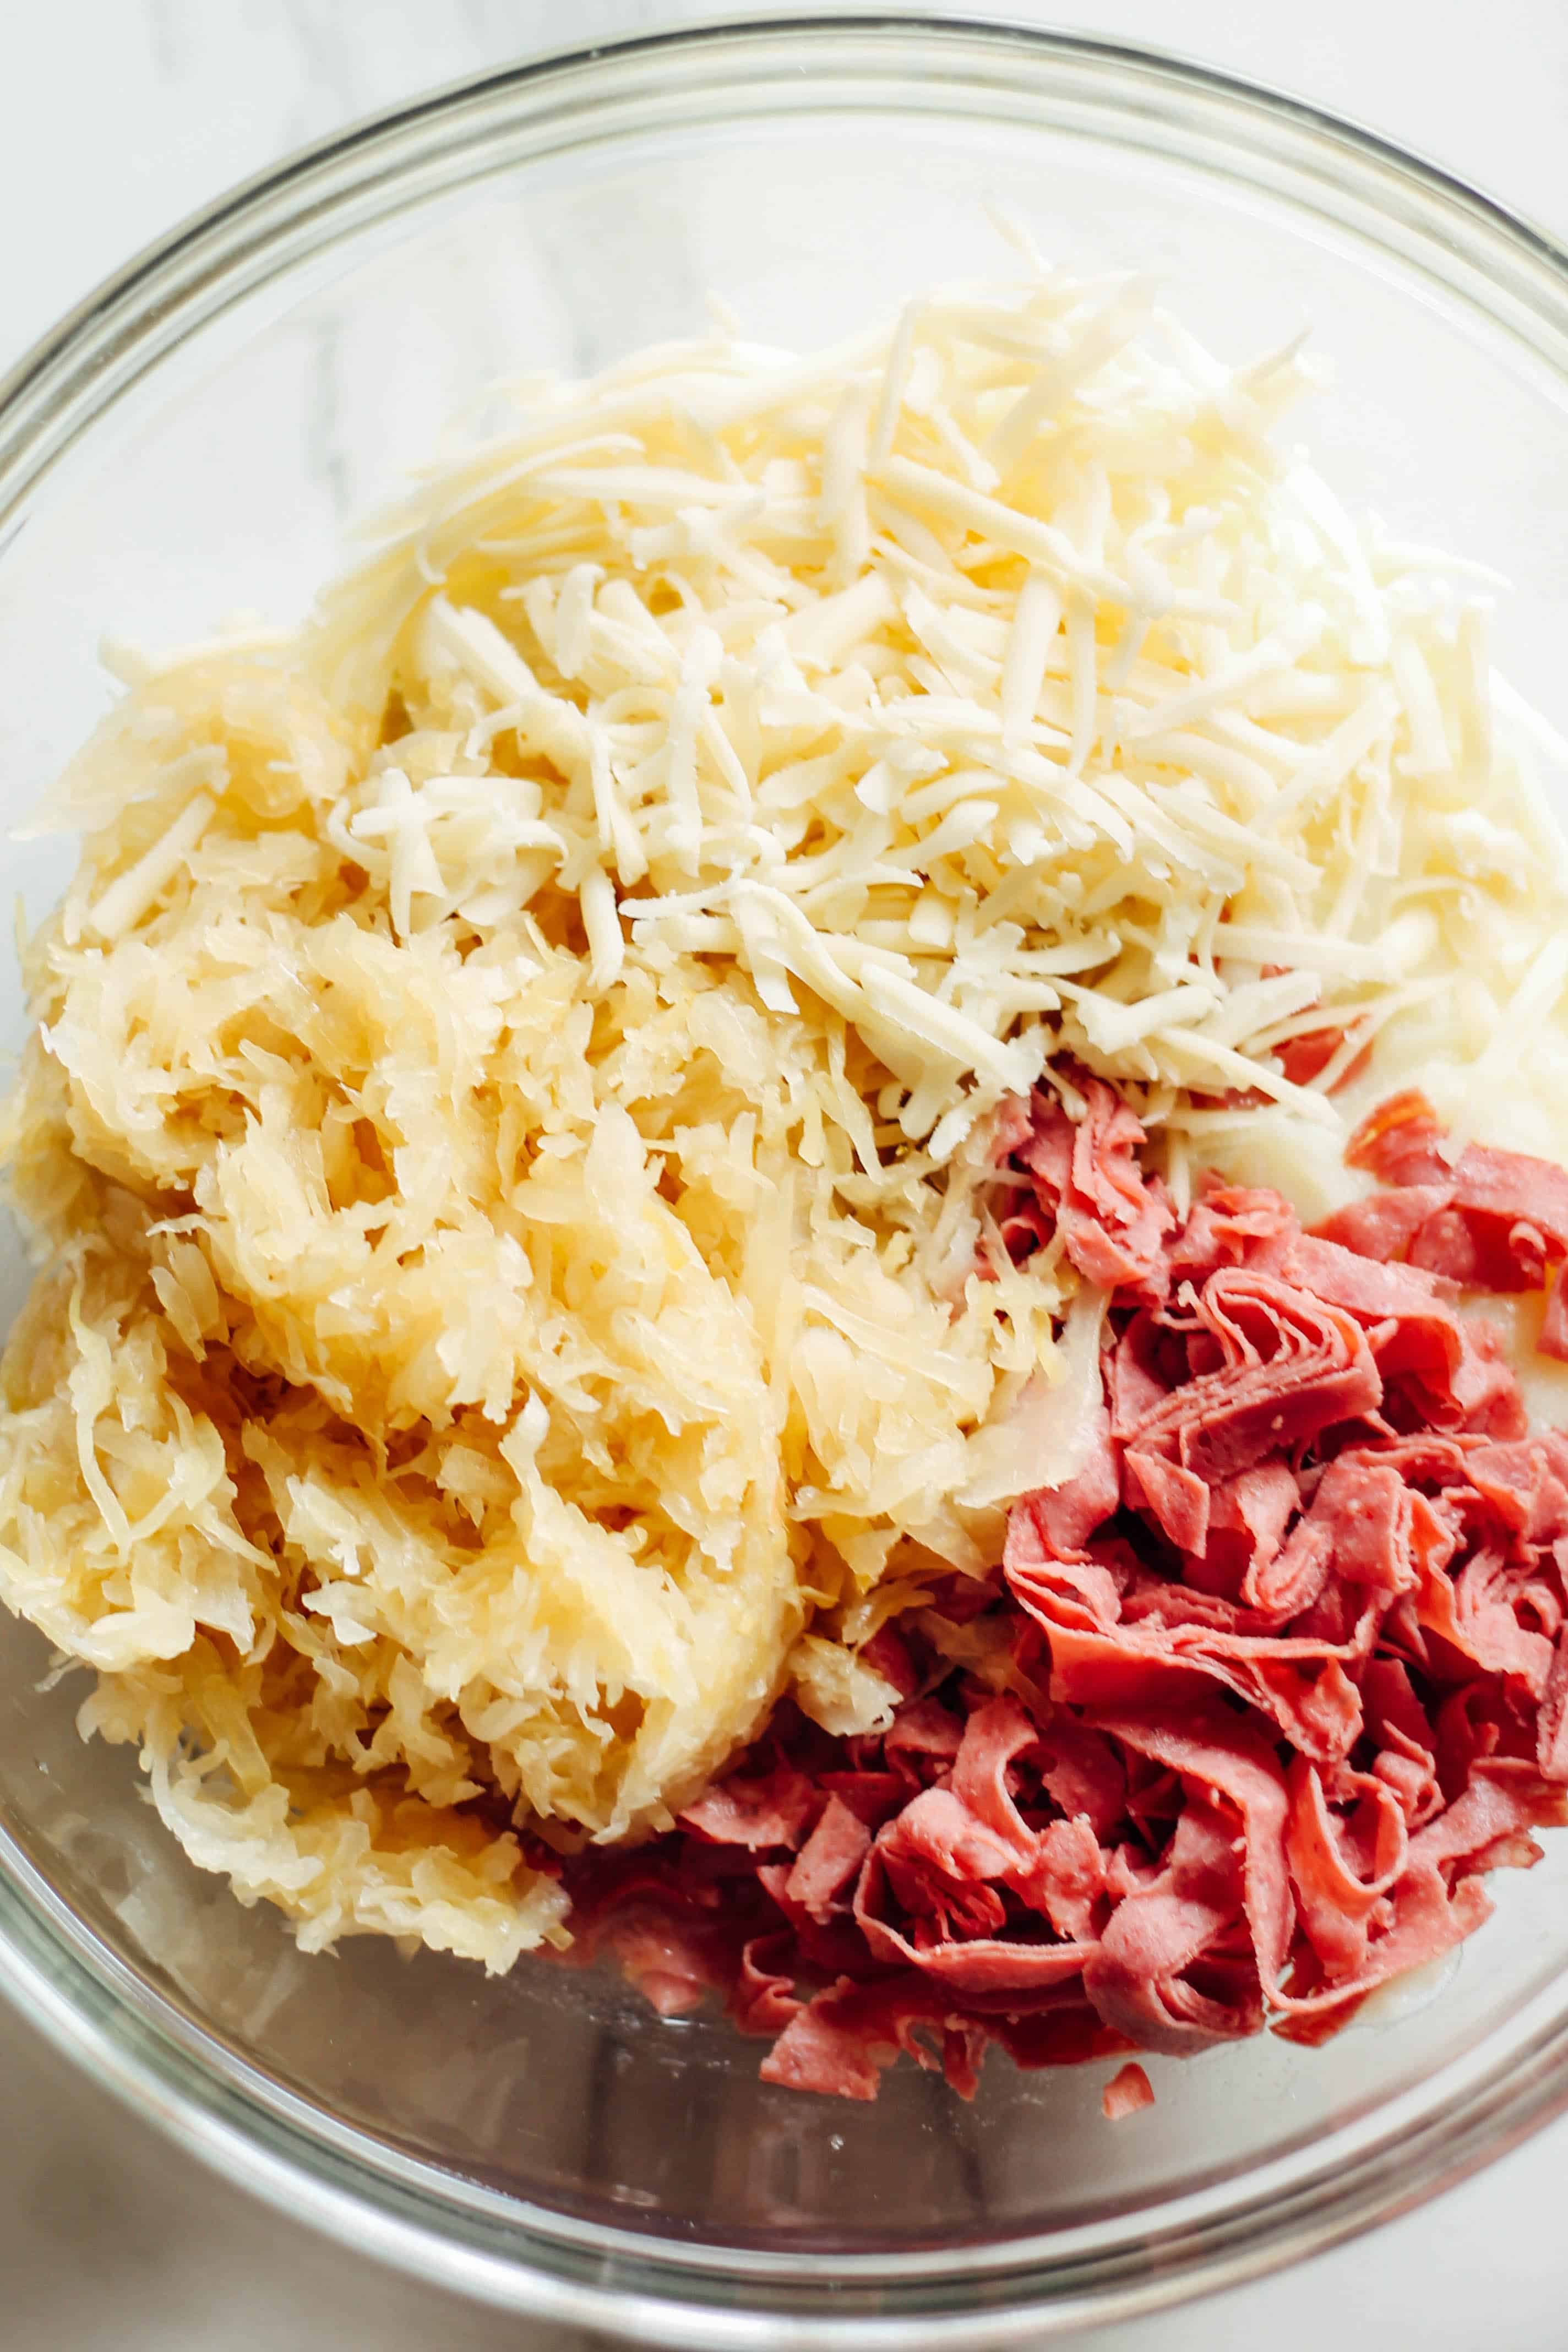 Lightened Up Reuben Dip | Destination Delish - A rich and creamy reuben dip made lighter with cauliflower and light cream cheese. Enjoy with pita chips, rye bread, or veggies! 